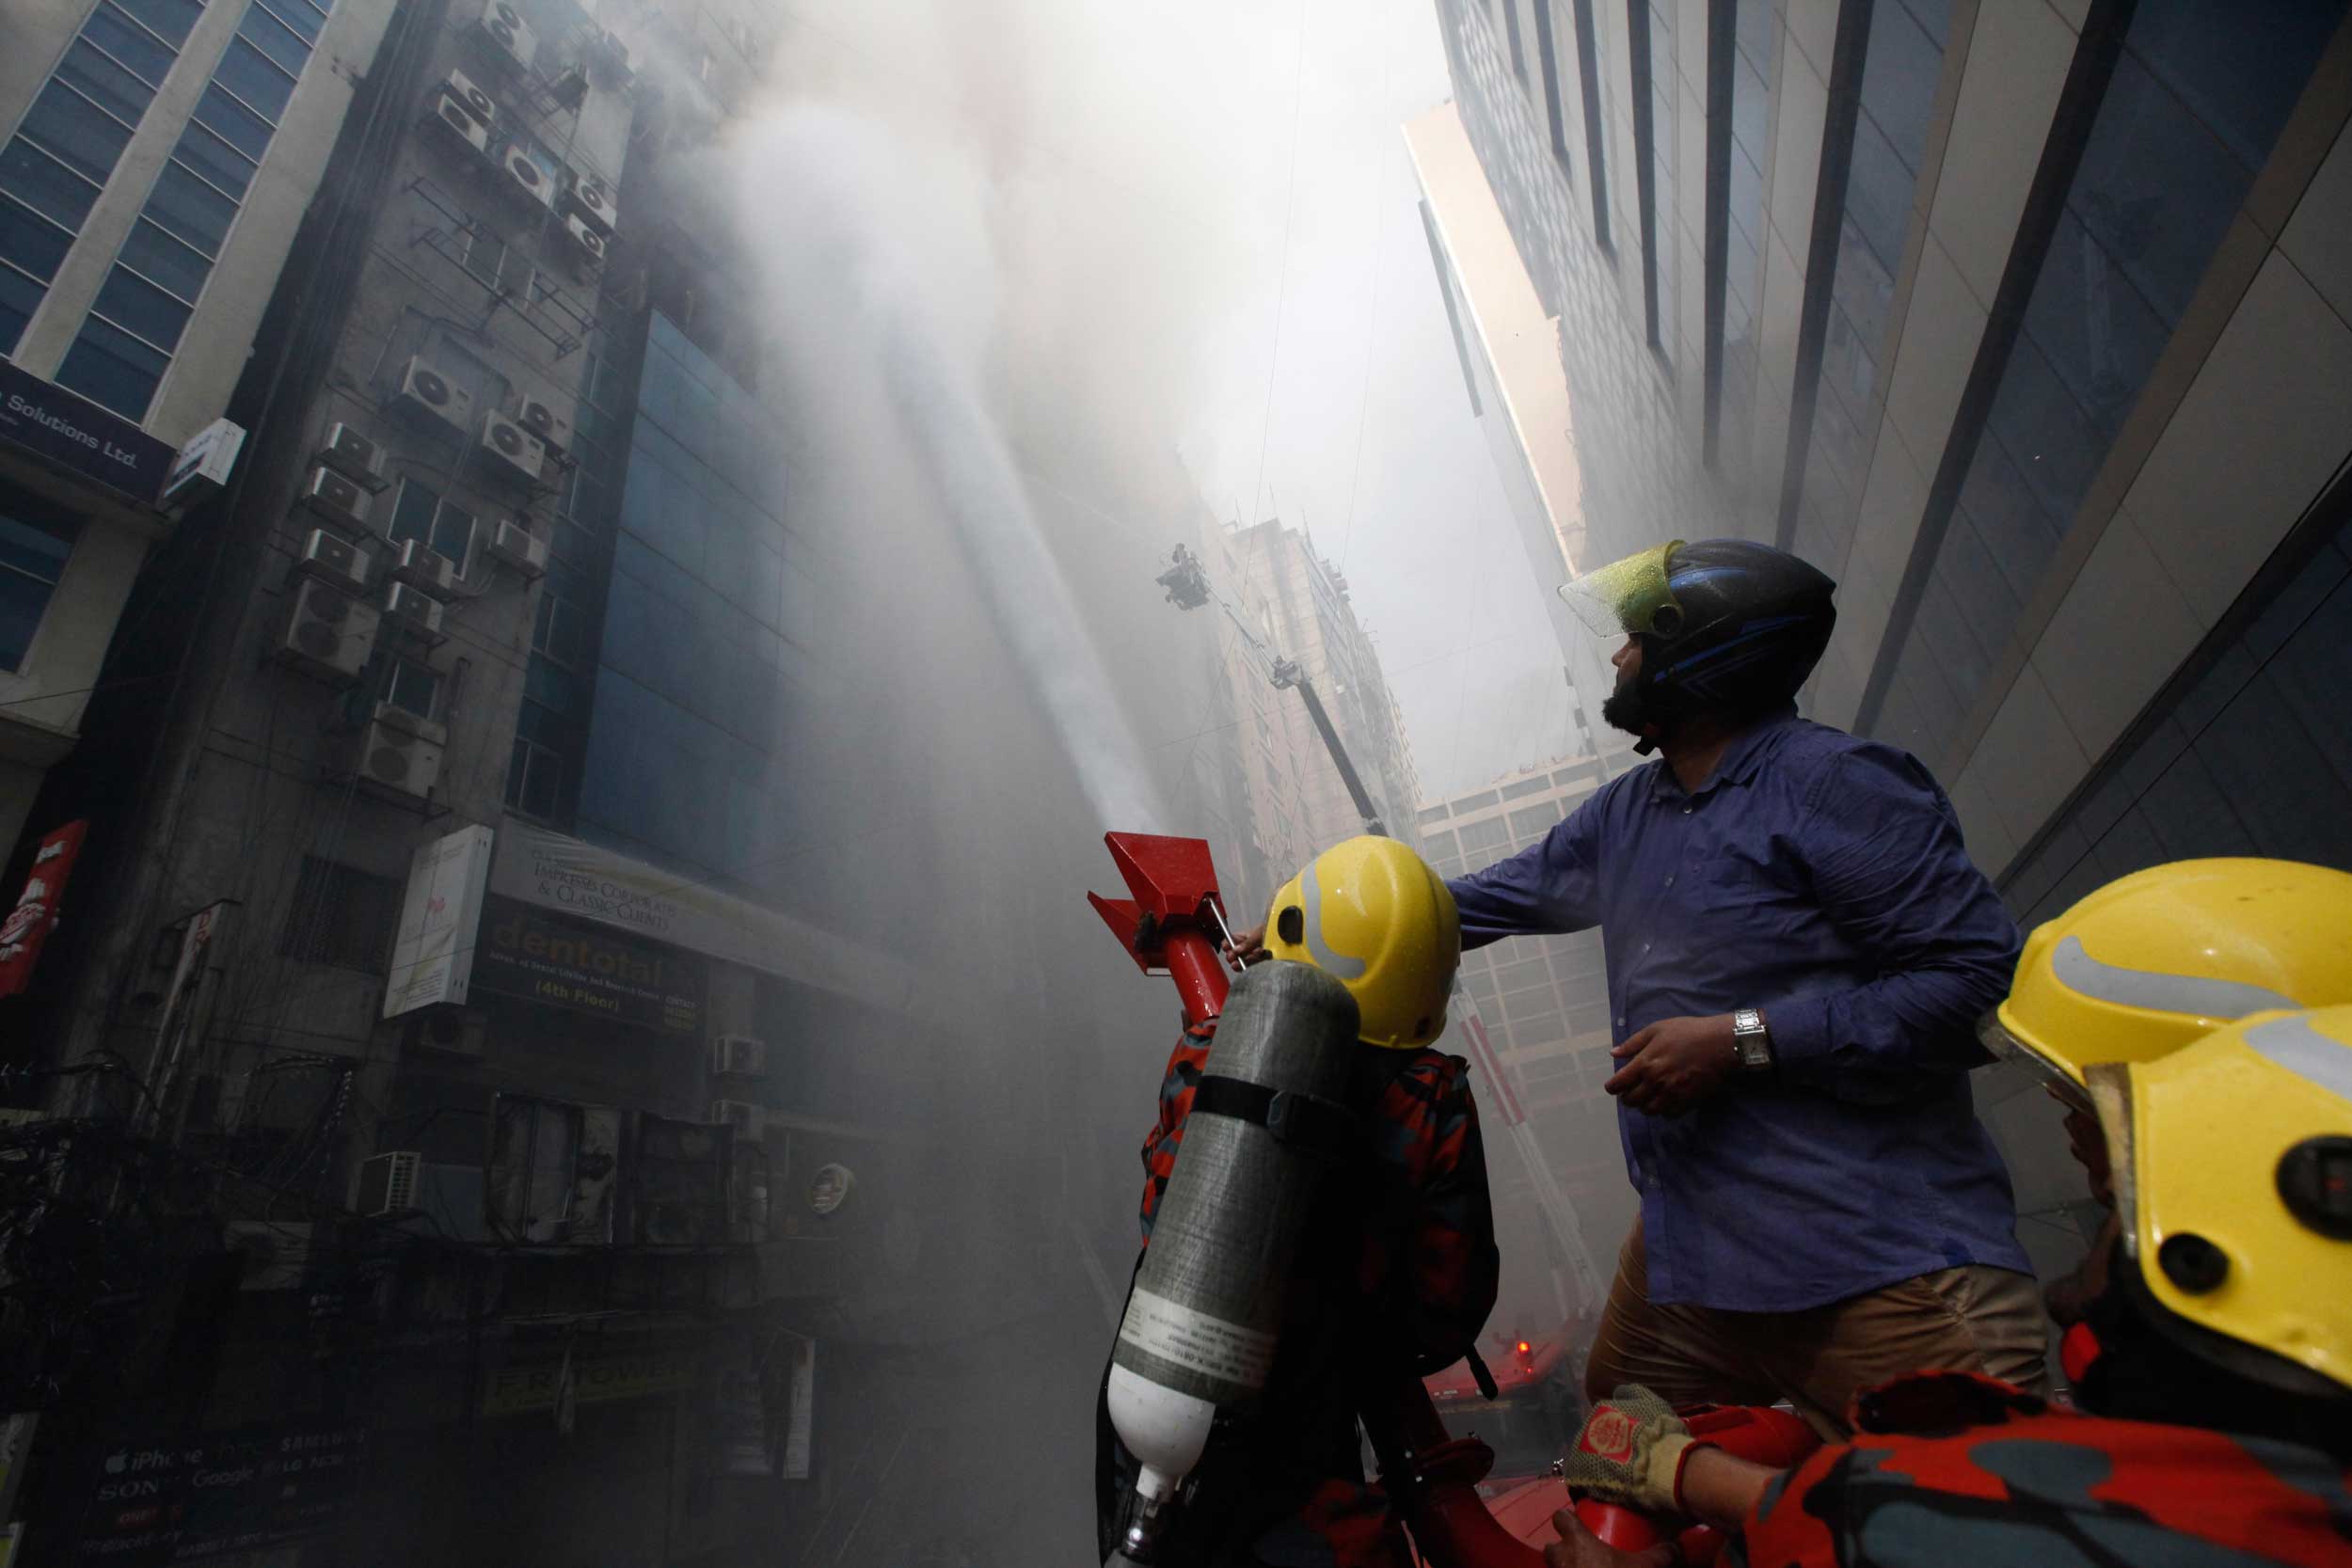 Firefighters trying to douse a fire in a multi-storied office building in Dhaka, Bangladesh, on Thursday.